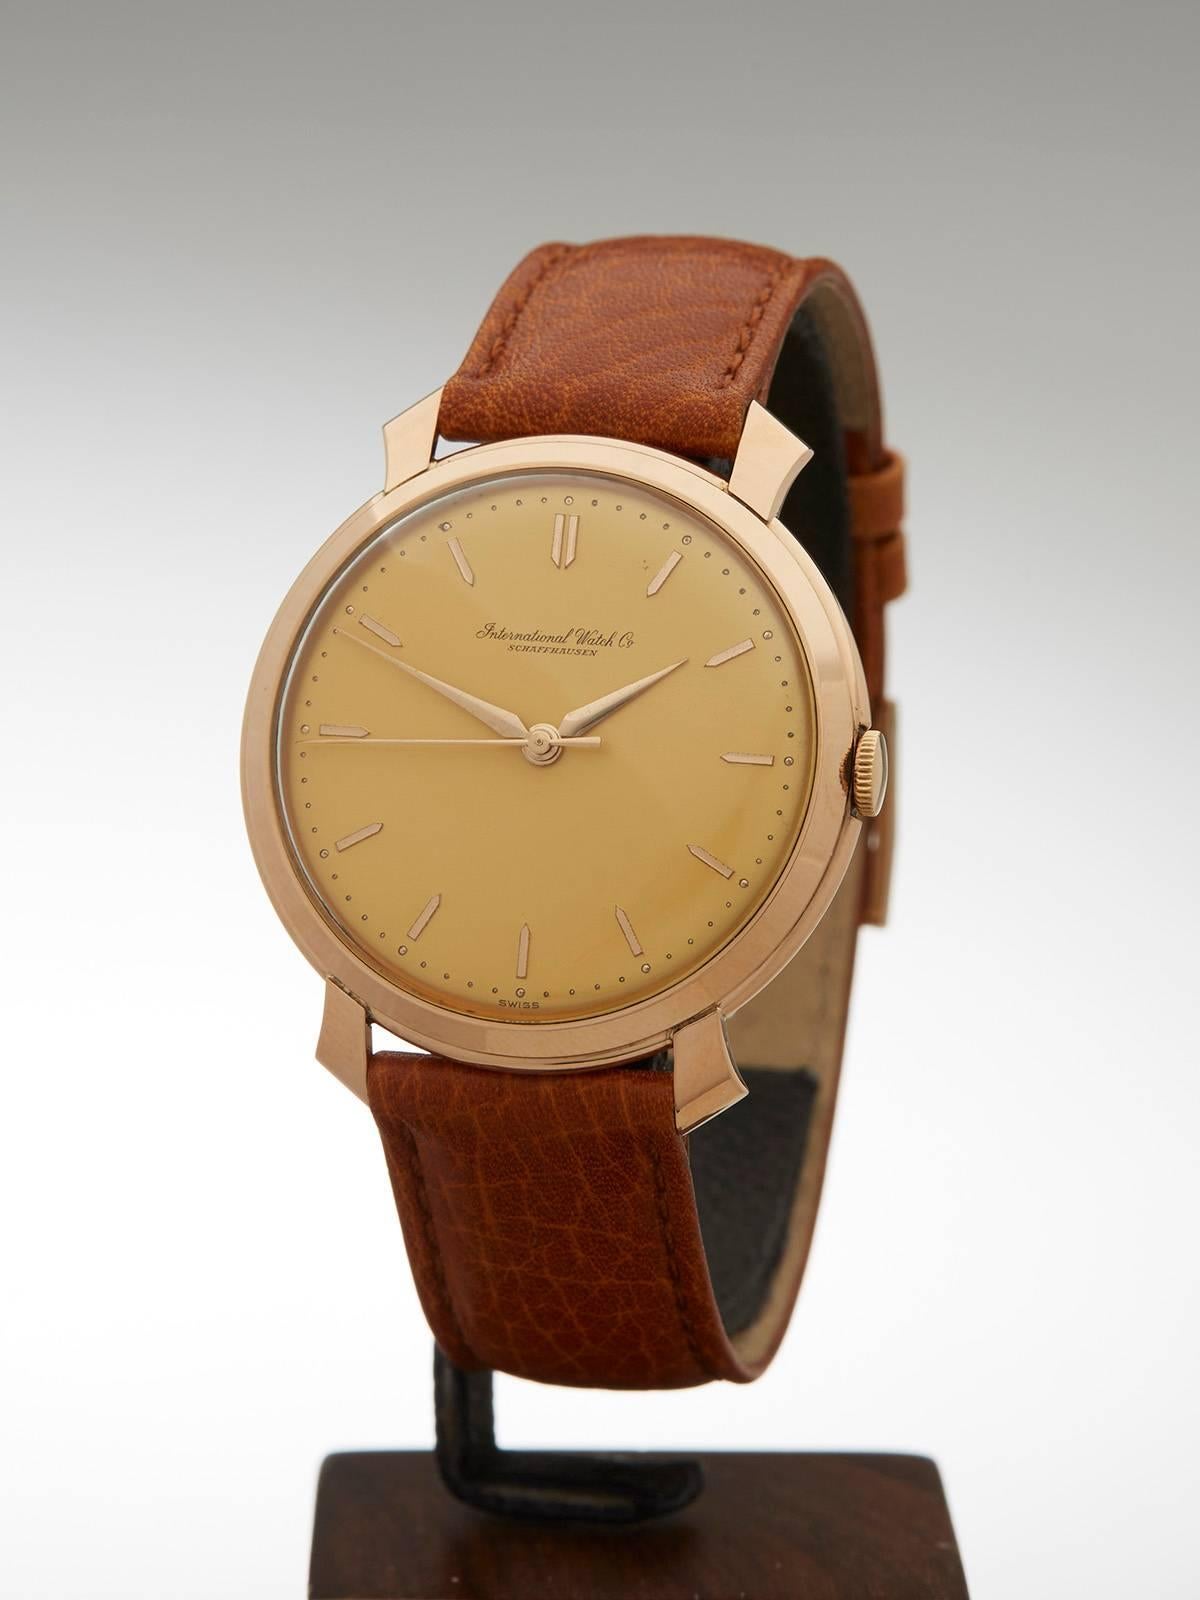 Ref: COM606
Condition: 9 - Excellent condition
Age: 1960
Case Diameter: 37 mm
Case Size: 36.8mm
Box and Papers: Period IWC box
Movement: Mechanical Wind
Case: 18k Rose Gold
Dial: Gold
Bracelet: IWC Strap
Strap Length: Adjustable up to 20cm
Strap